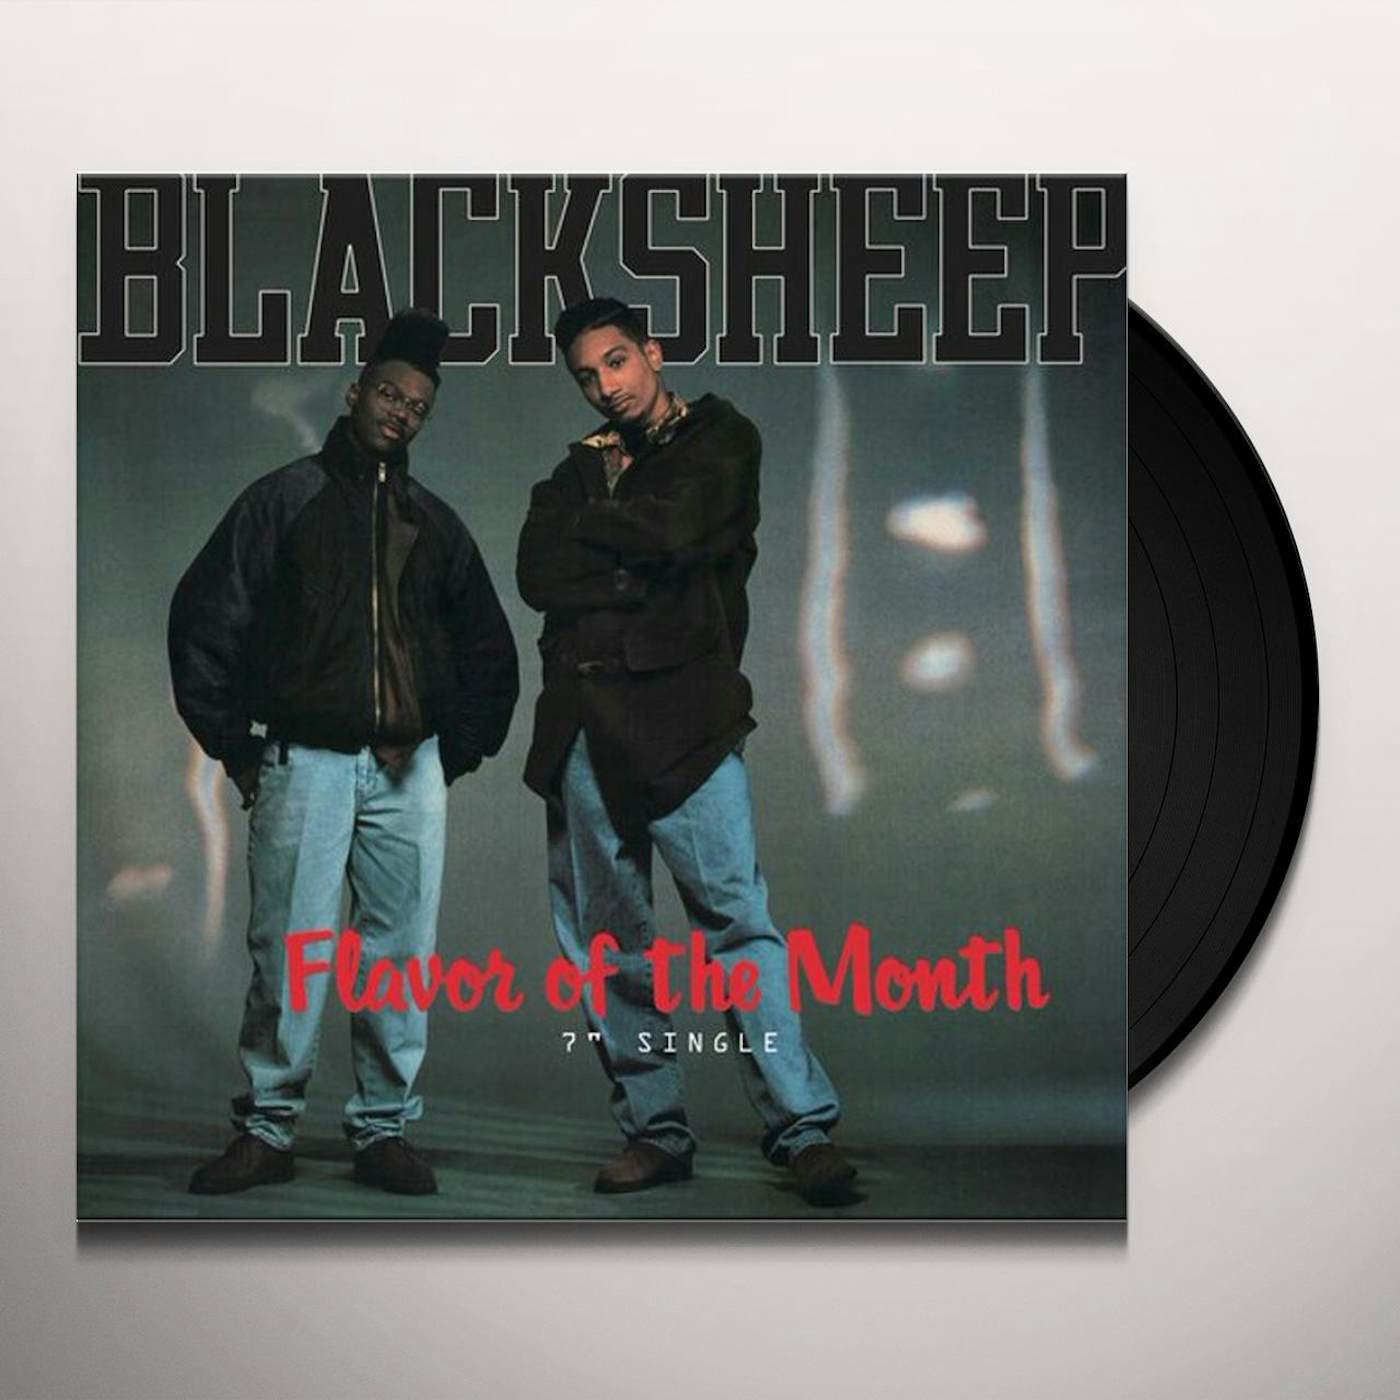 Black Sheep Flavor Of The Month Vinyl Record